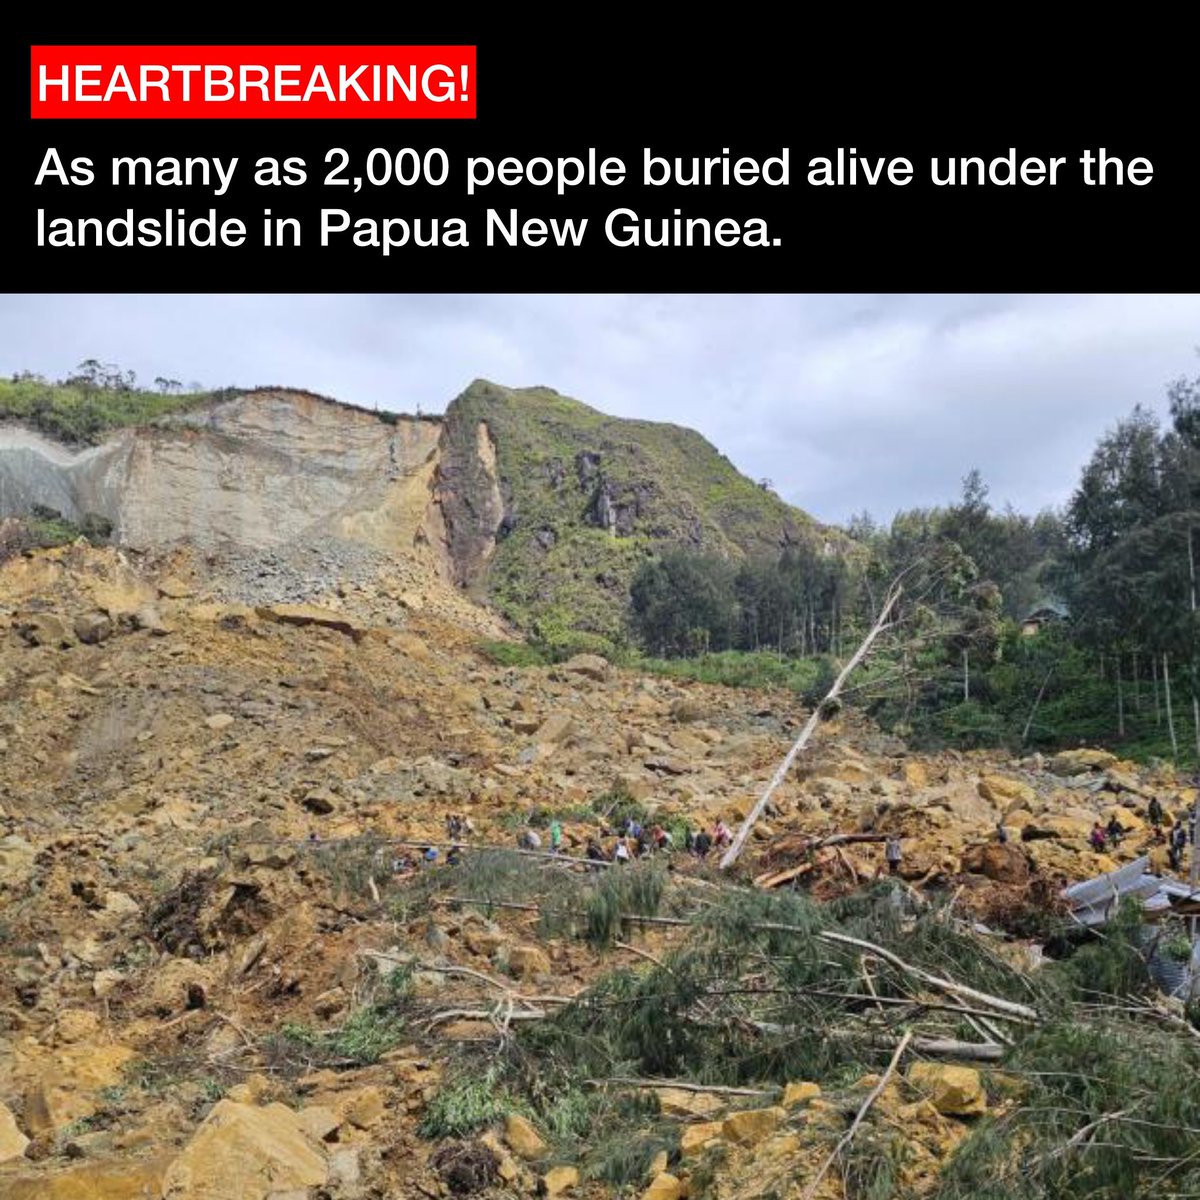 HEARTBREAKING: As many as 2,000 people are feared to have been buried alive by last week’s massive landslide in Papua New Guinea, according to reports. More than 670 people are believed to have been killed in a massive landslide. Rest in peace beautiful souls 🕊️ #papuanewguinea